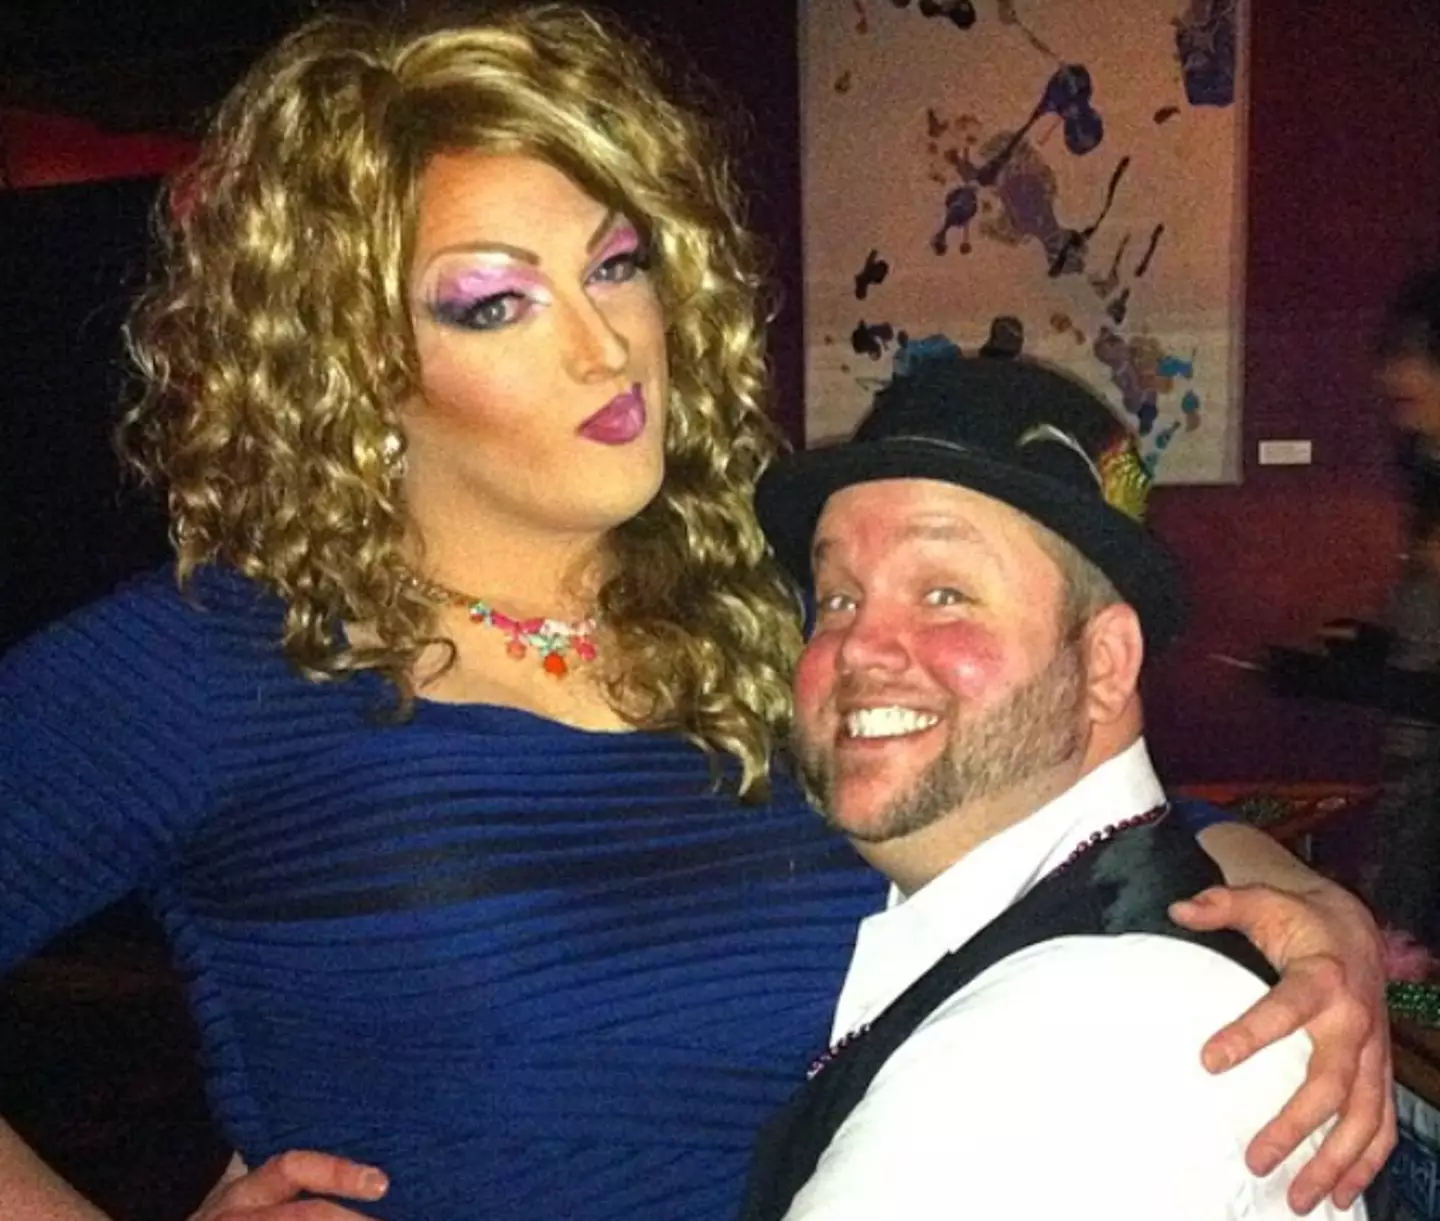 The pair believe their roles as drag queens has helped their son learn valuable life lessons.